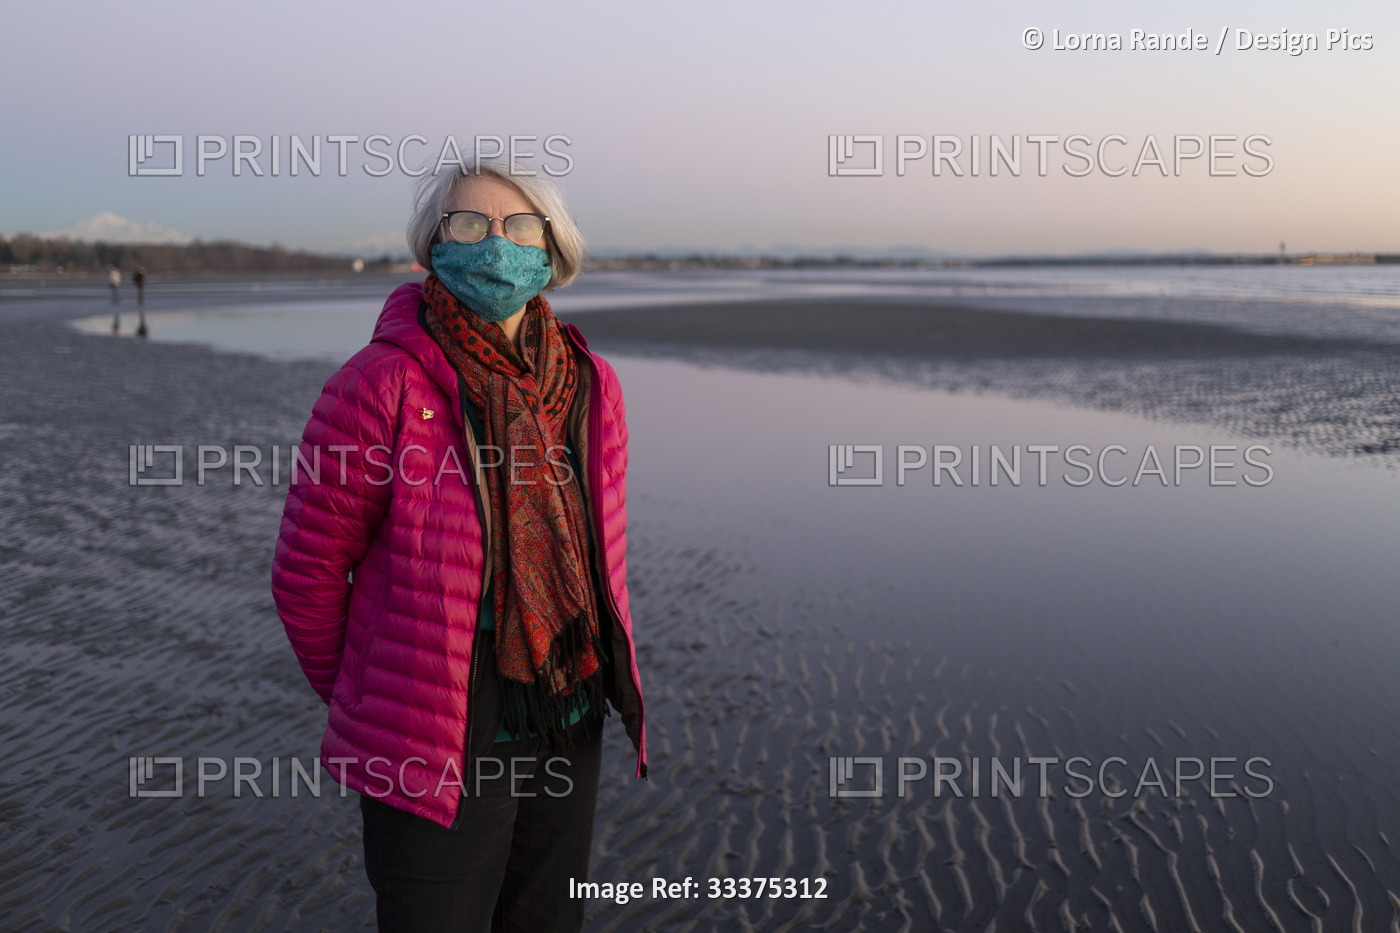 A senior woman stands on a wet beach wearing a face mask during the global ...